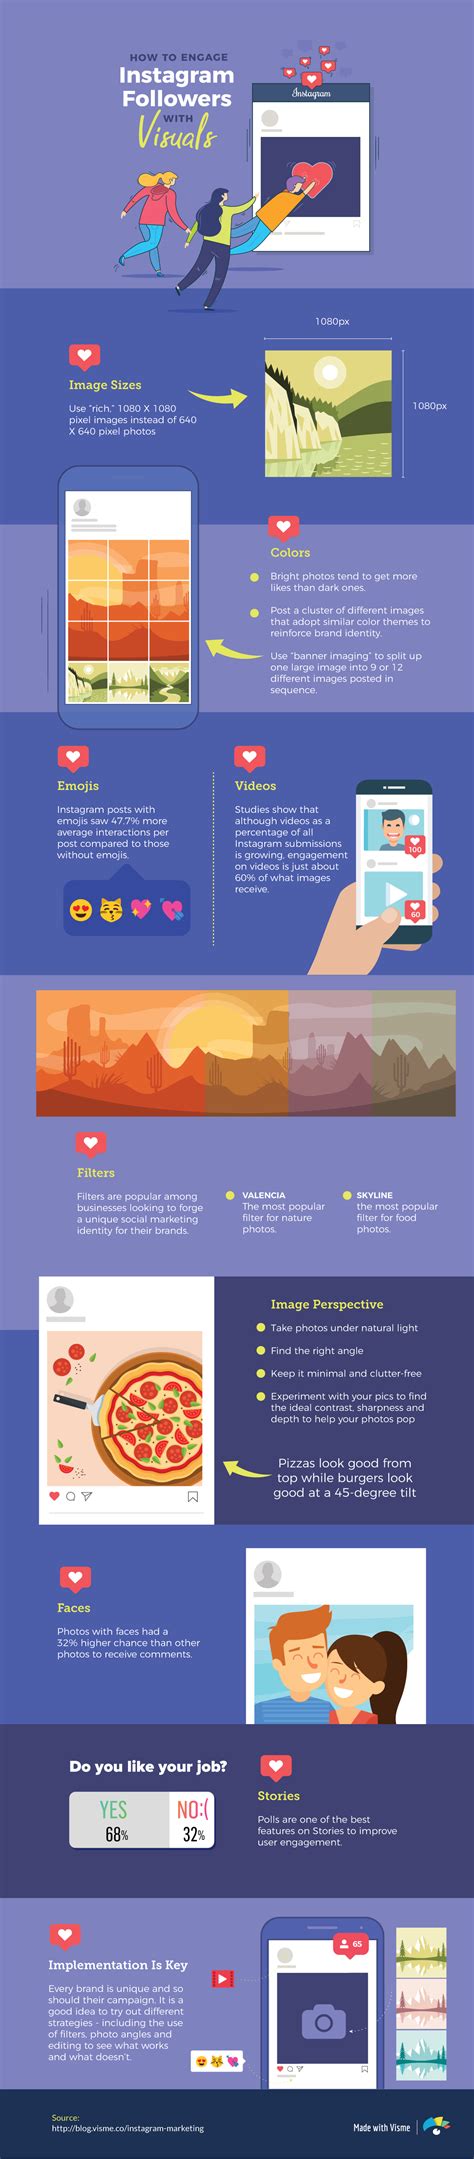 Instagram Marketing Guide How To Engage Followers With Visuals